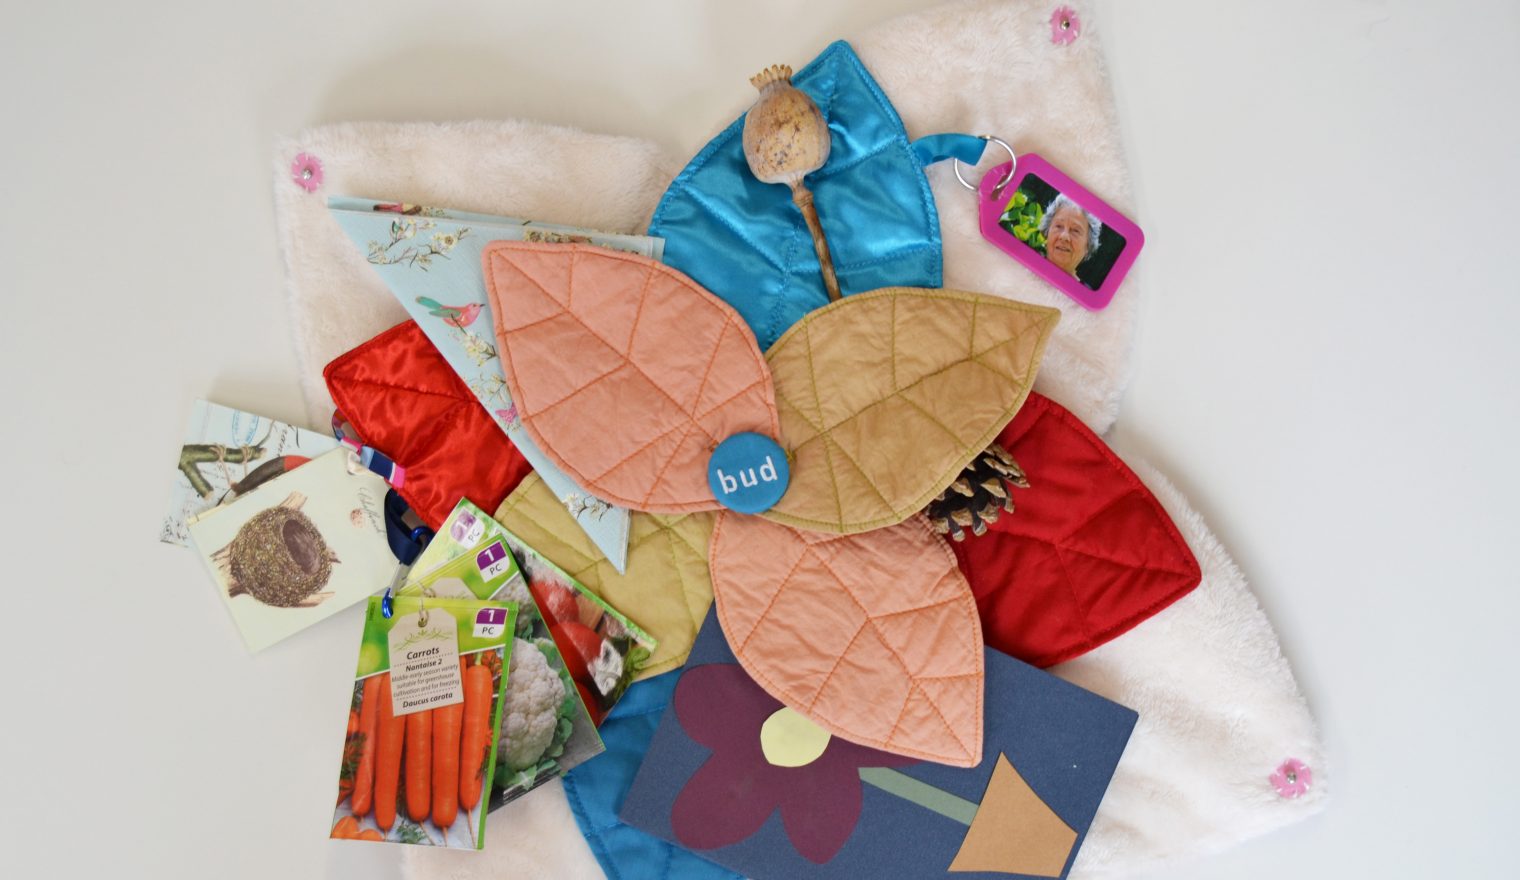 An open Bud sensory cushion featuring items relating to gardening